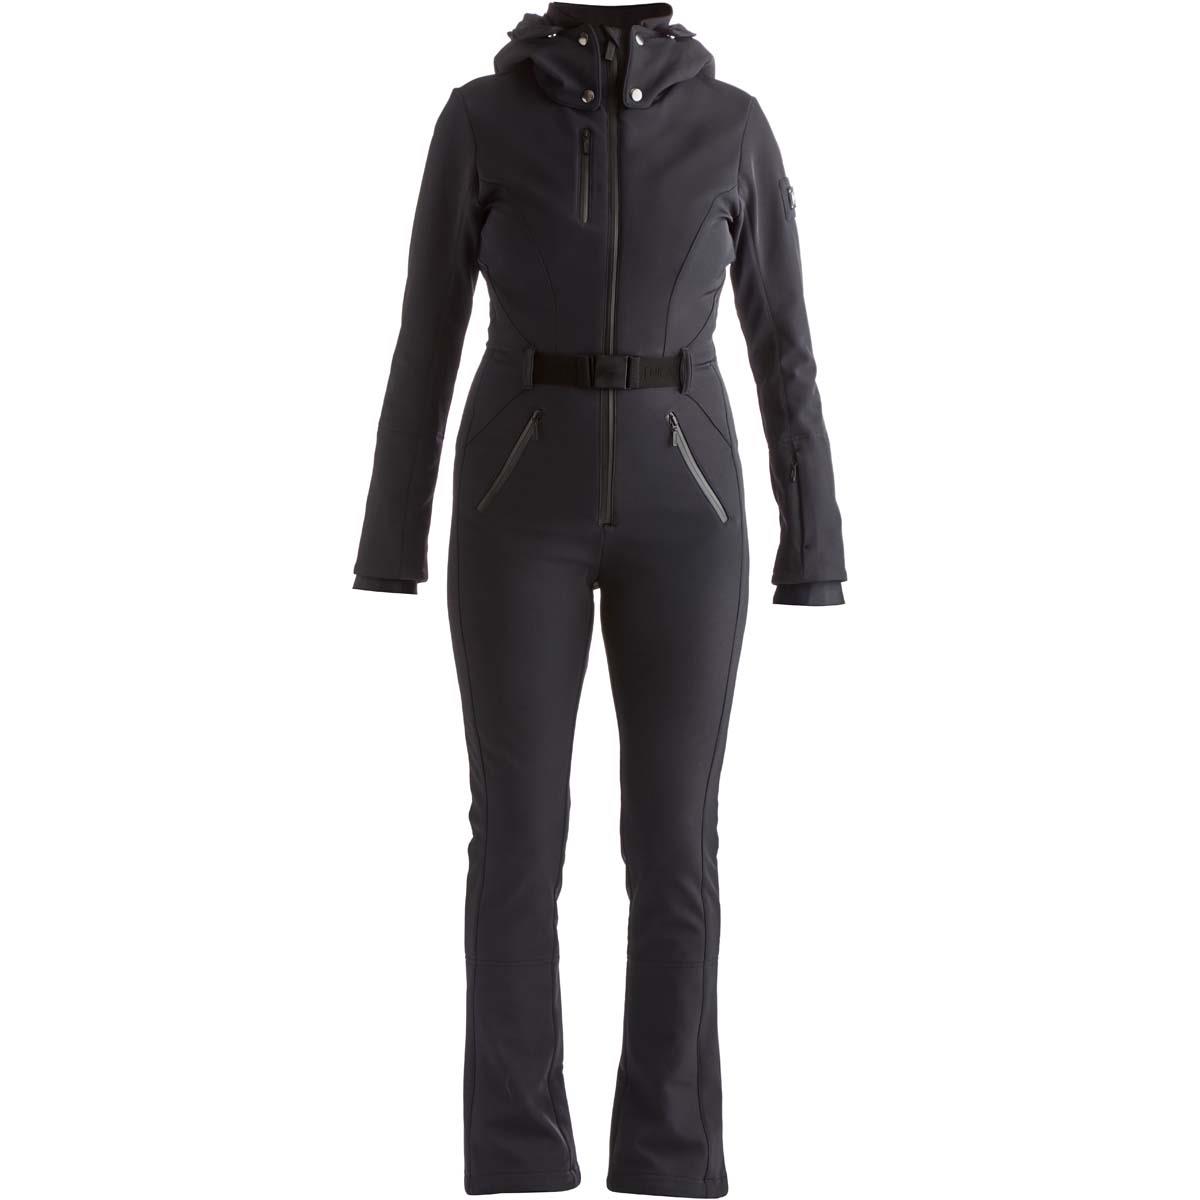 Onepiece Ski Suits for Women – Tagged goldbergh